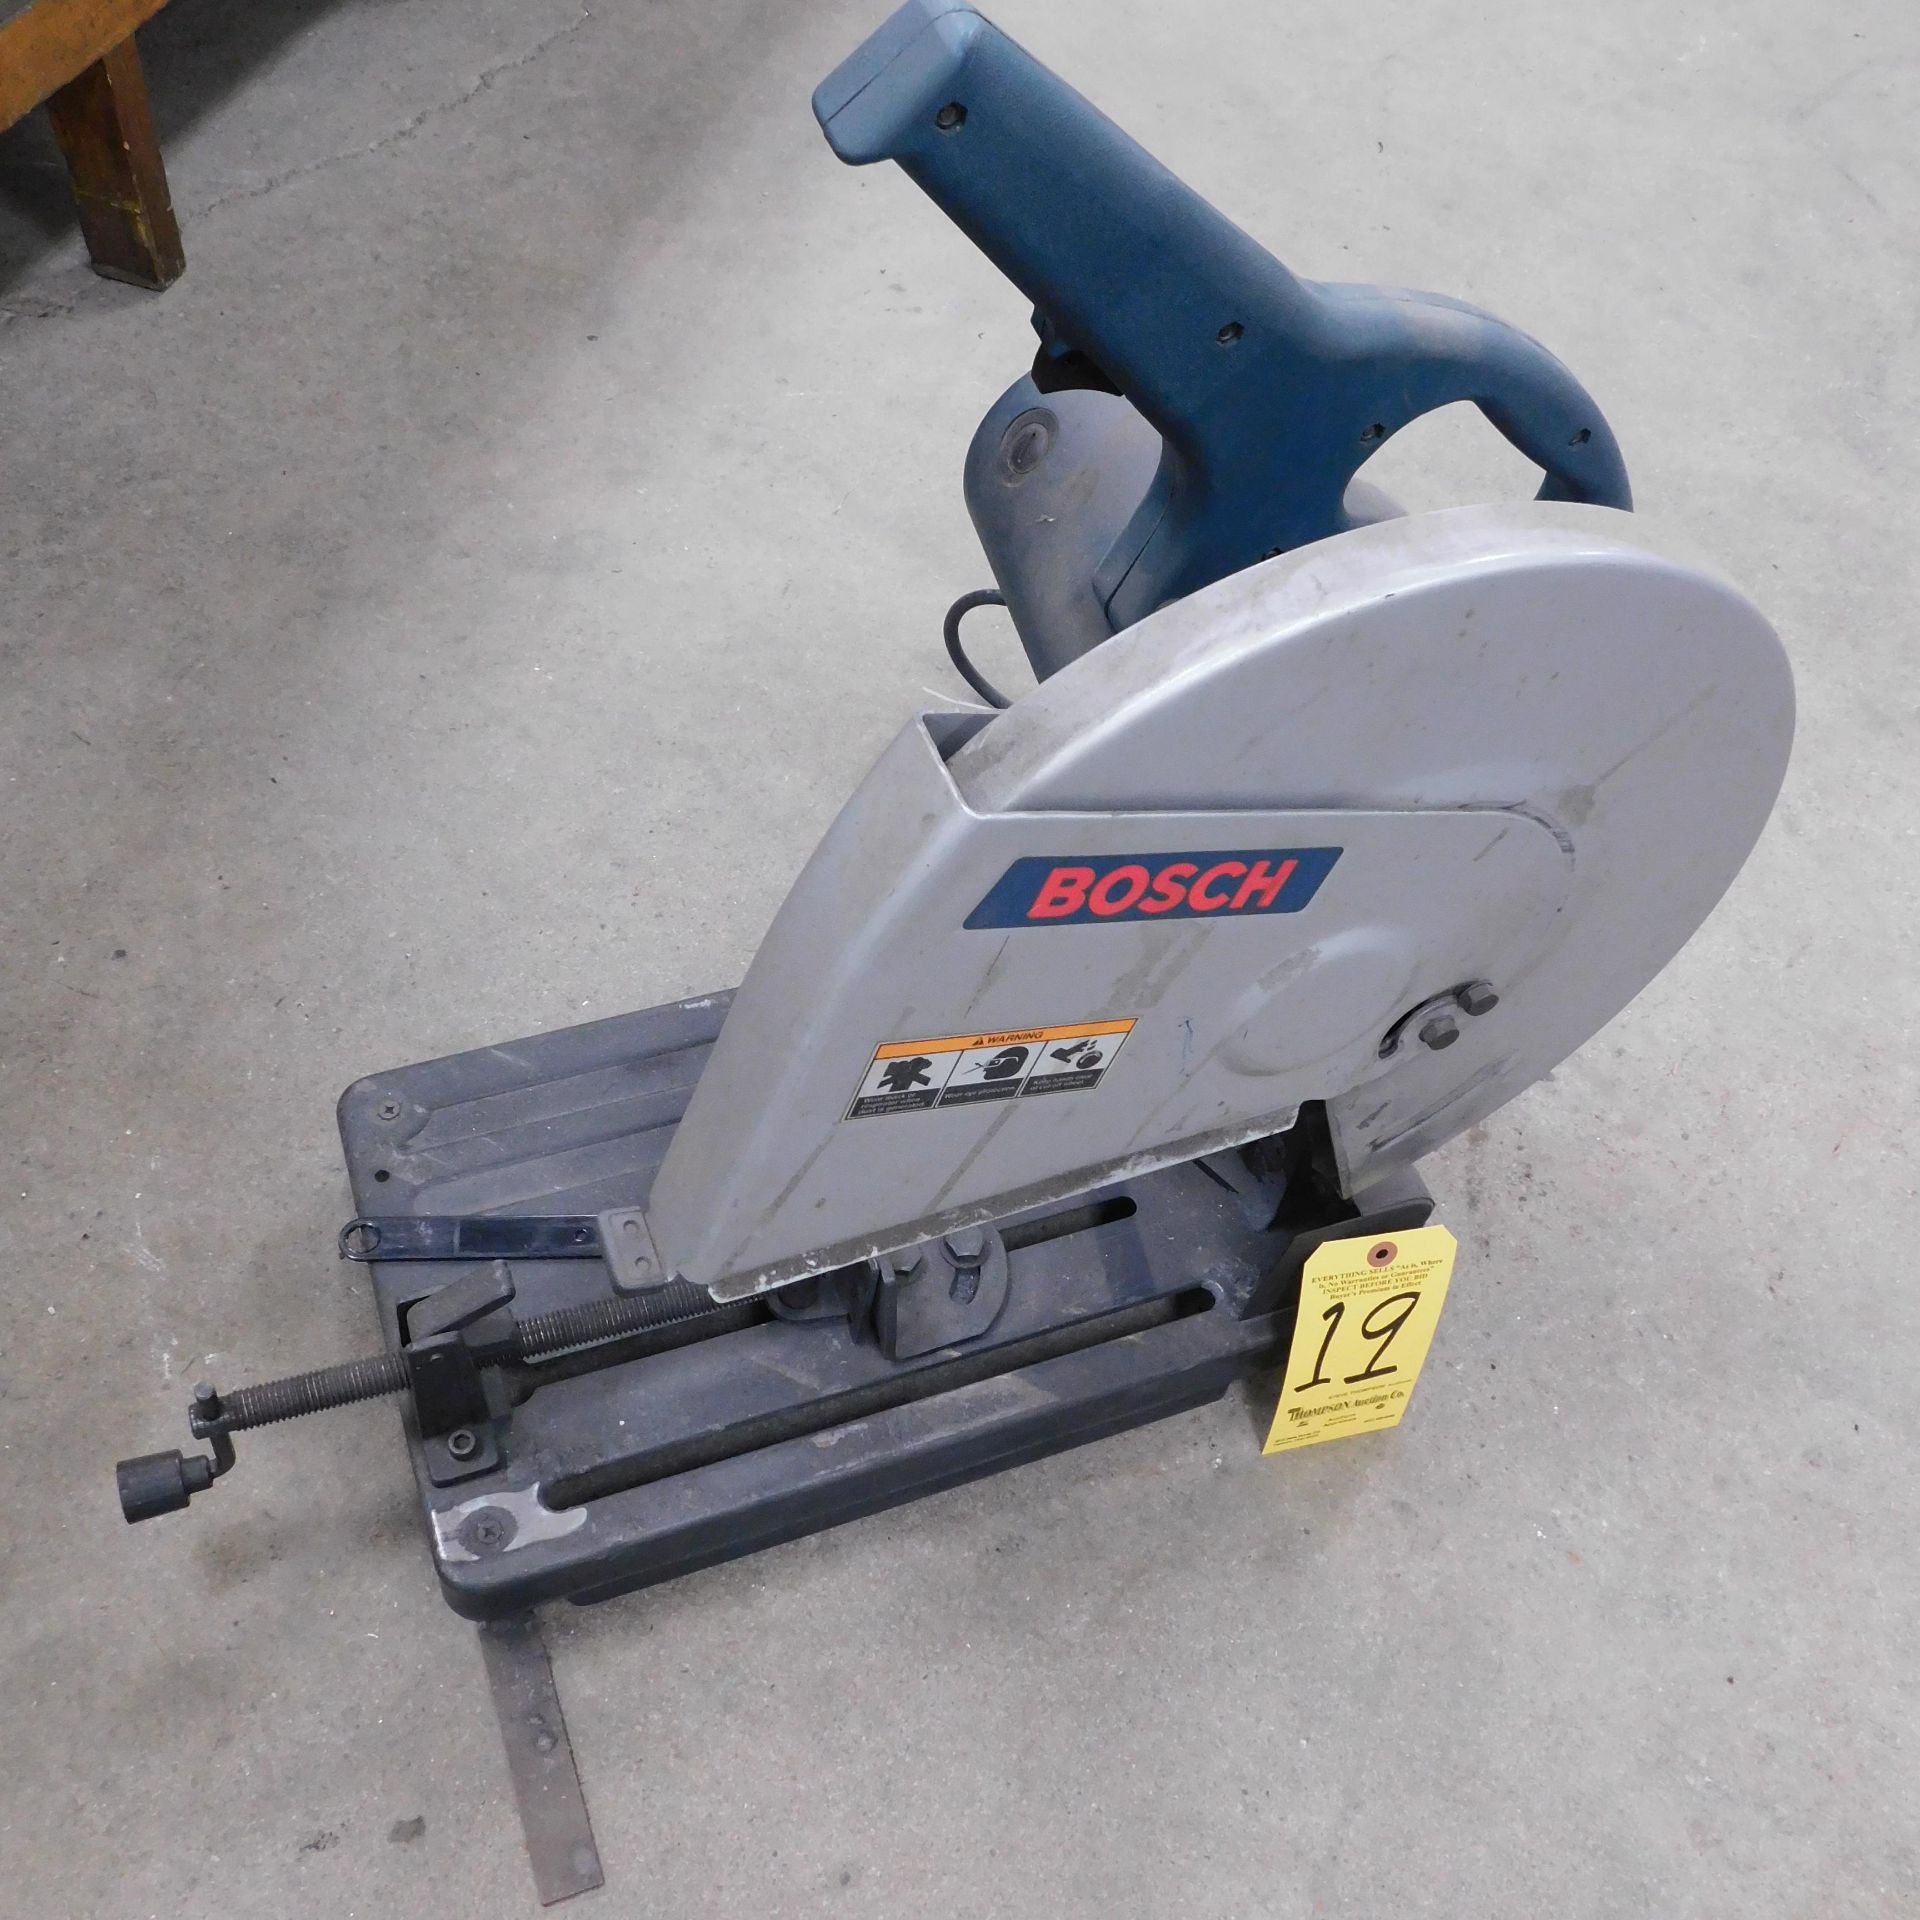 Bosch Abrasive Cut Off Saw, Model 3814, with Case